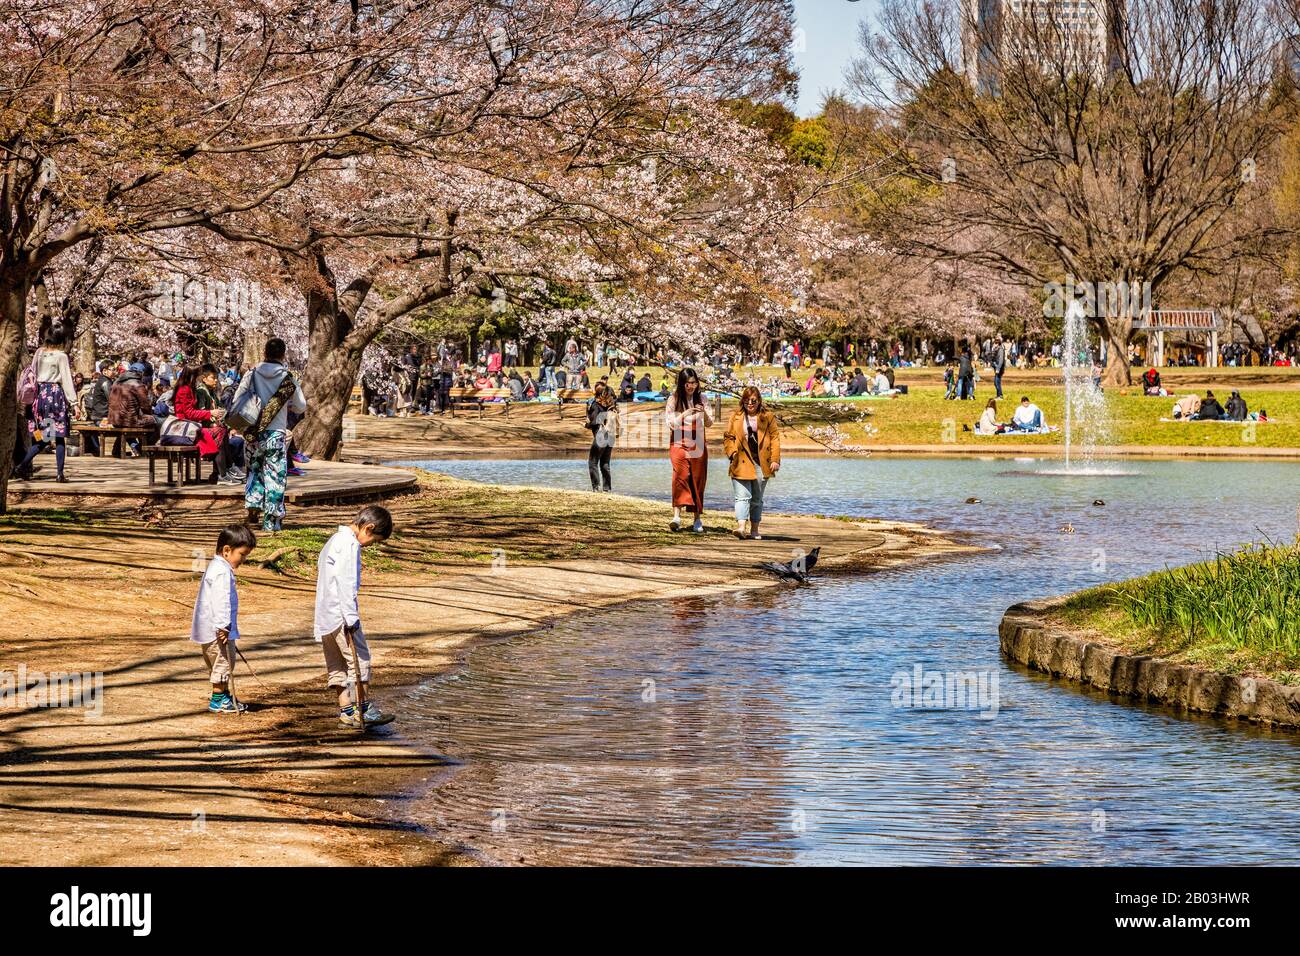 24 March 2019: Tokyo, Japan - People gather for hanami, cherry blossom viewing, around the lake in Yoyogi Park, Tokyo. This park is free to enter. Stock Photo